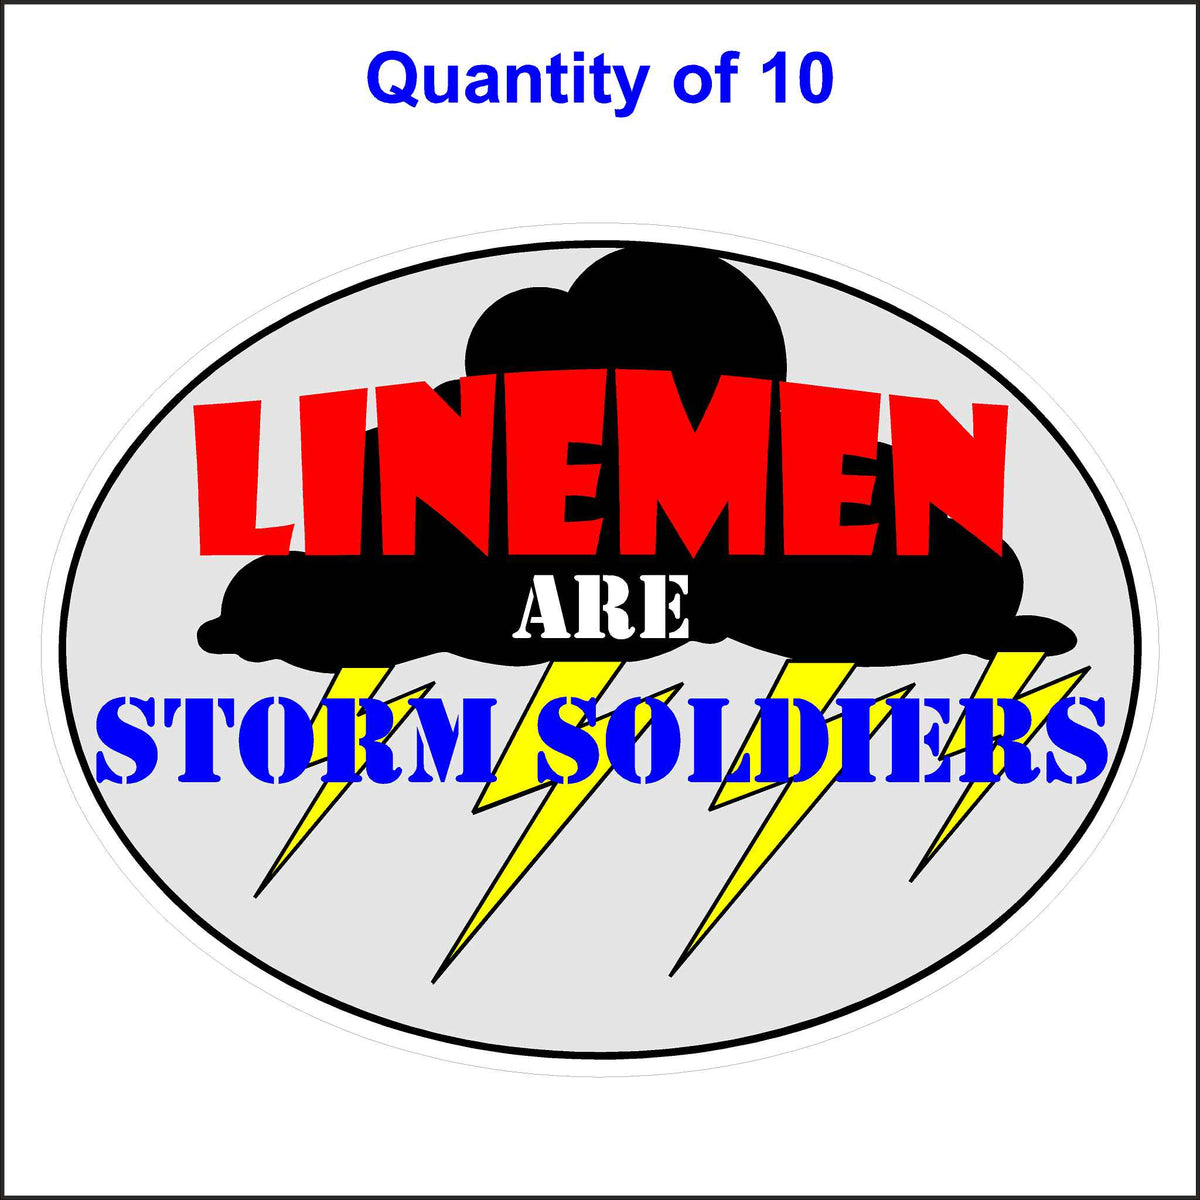 Gray Lineman Are Storm Soldiers Stickers. 10 Quantity.